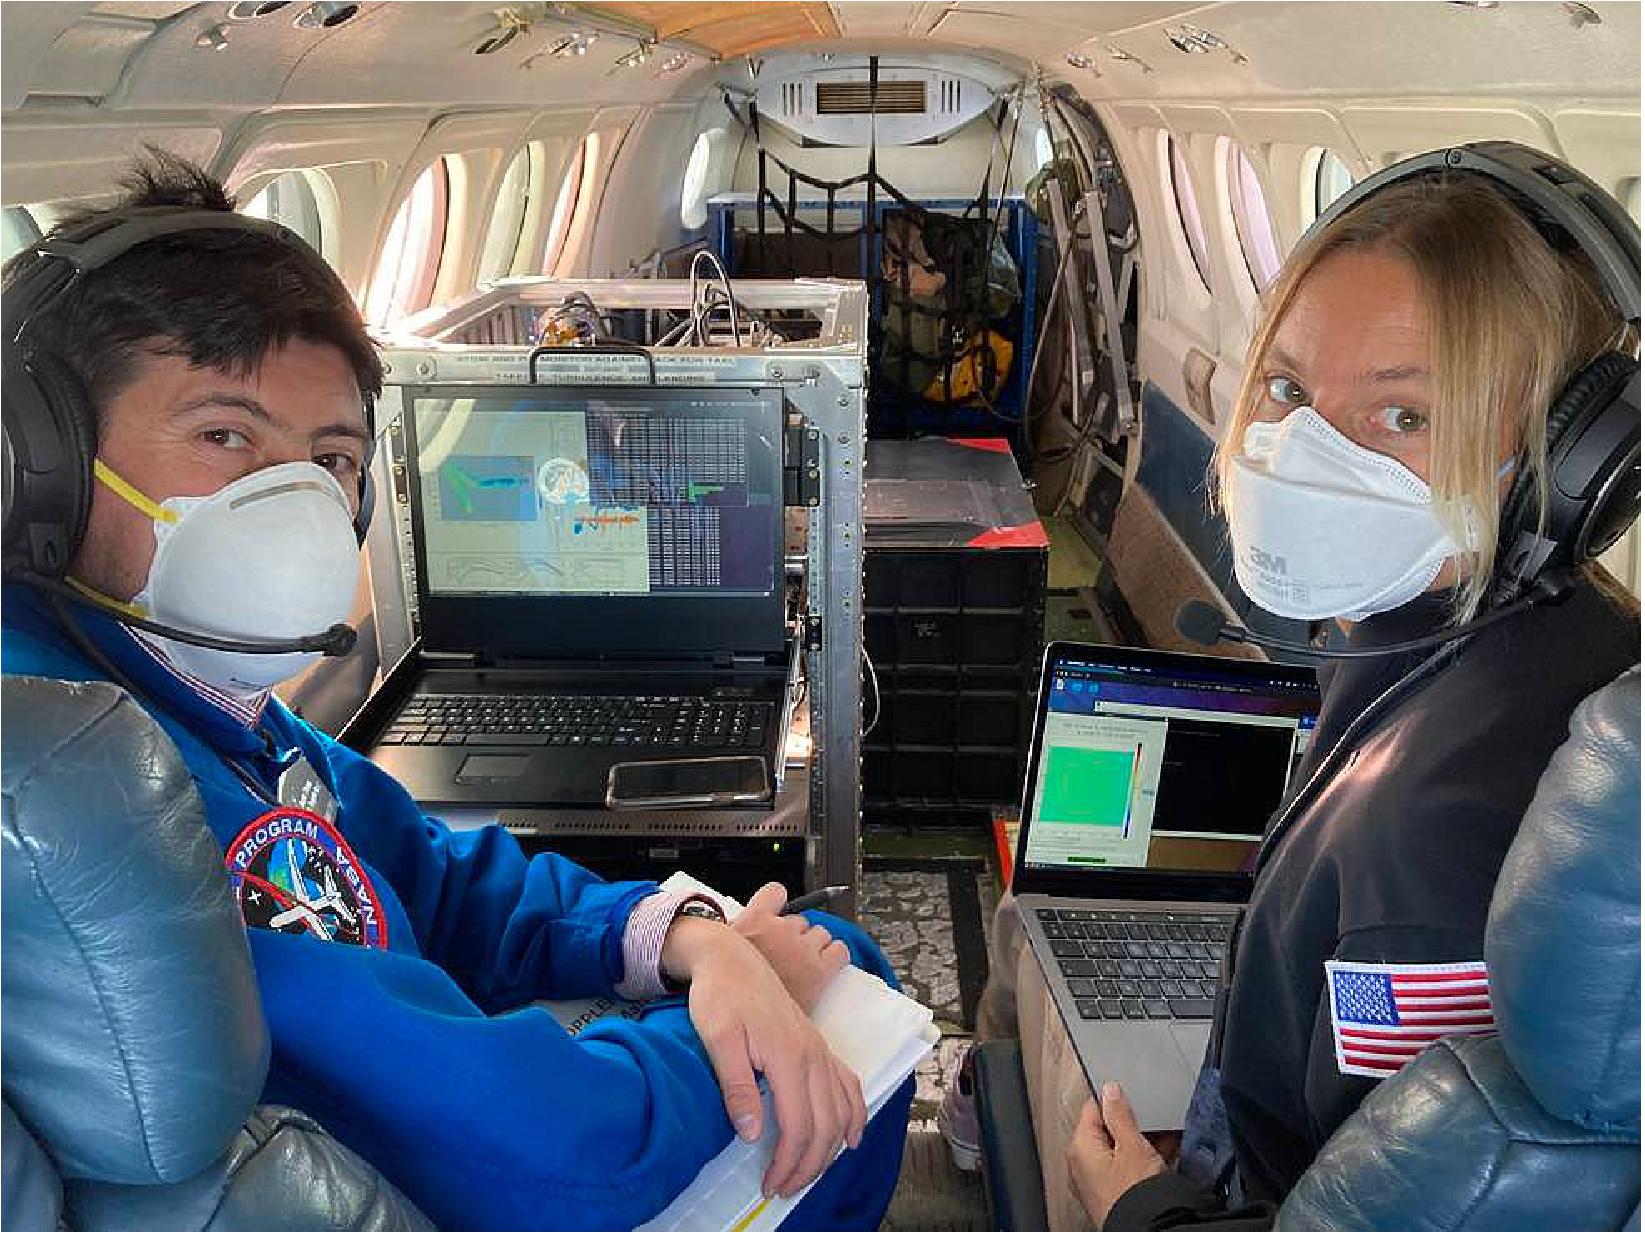 Figure 12: Hector Torres from NASA JPL and Delphine Hypolite from the University of California, Los Angeles onboard the AFRC B200 aircraft during the S-MODE flights (image credits: Scott Howe / Ames Flight Research Center)